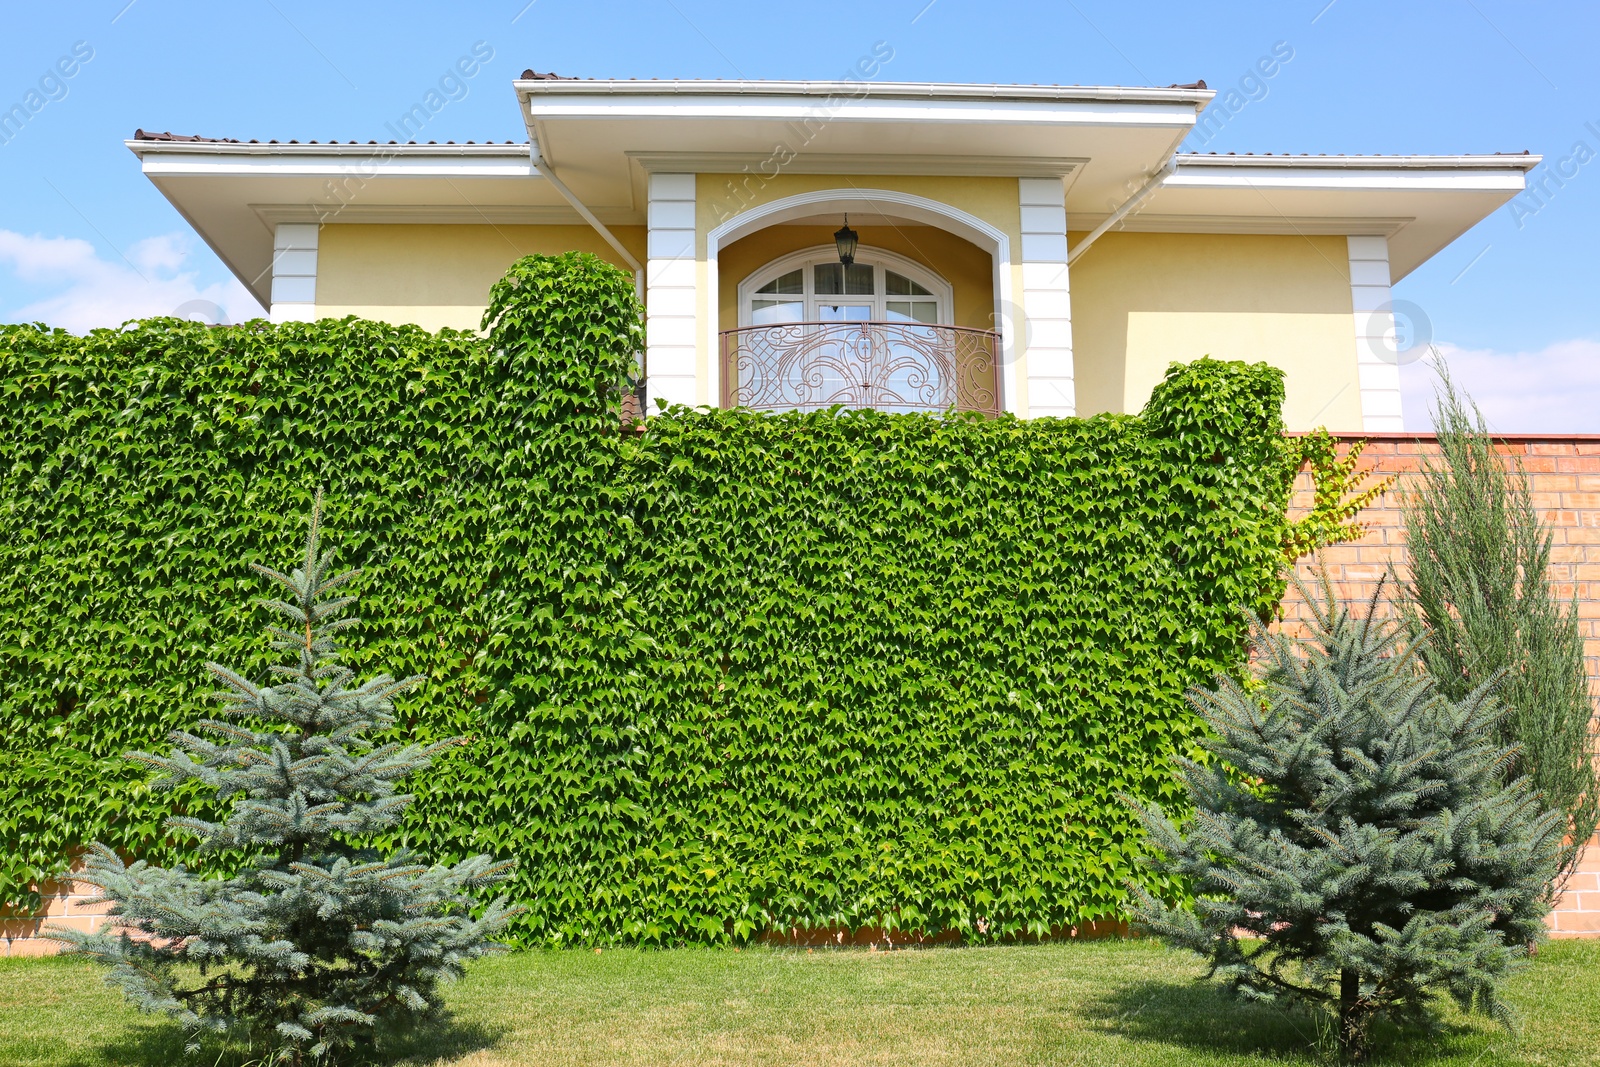 Photo of Fence covered with green ivy in garden near modern house